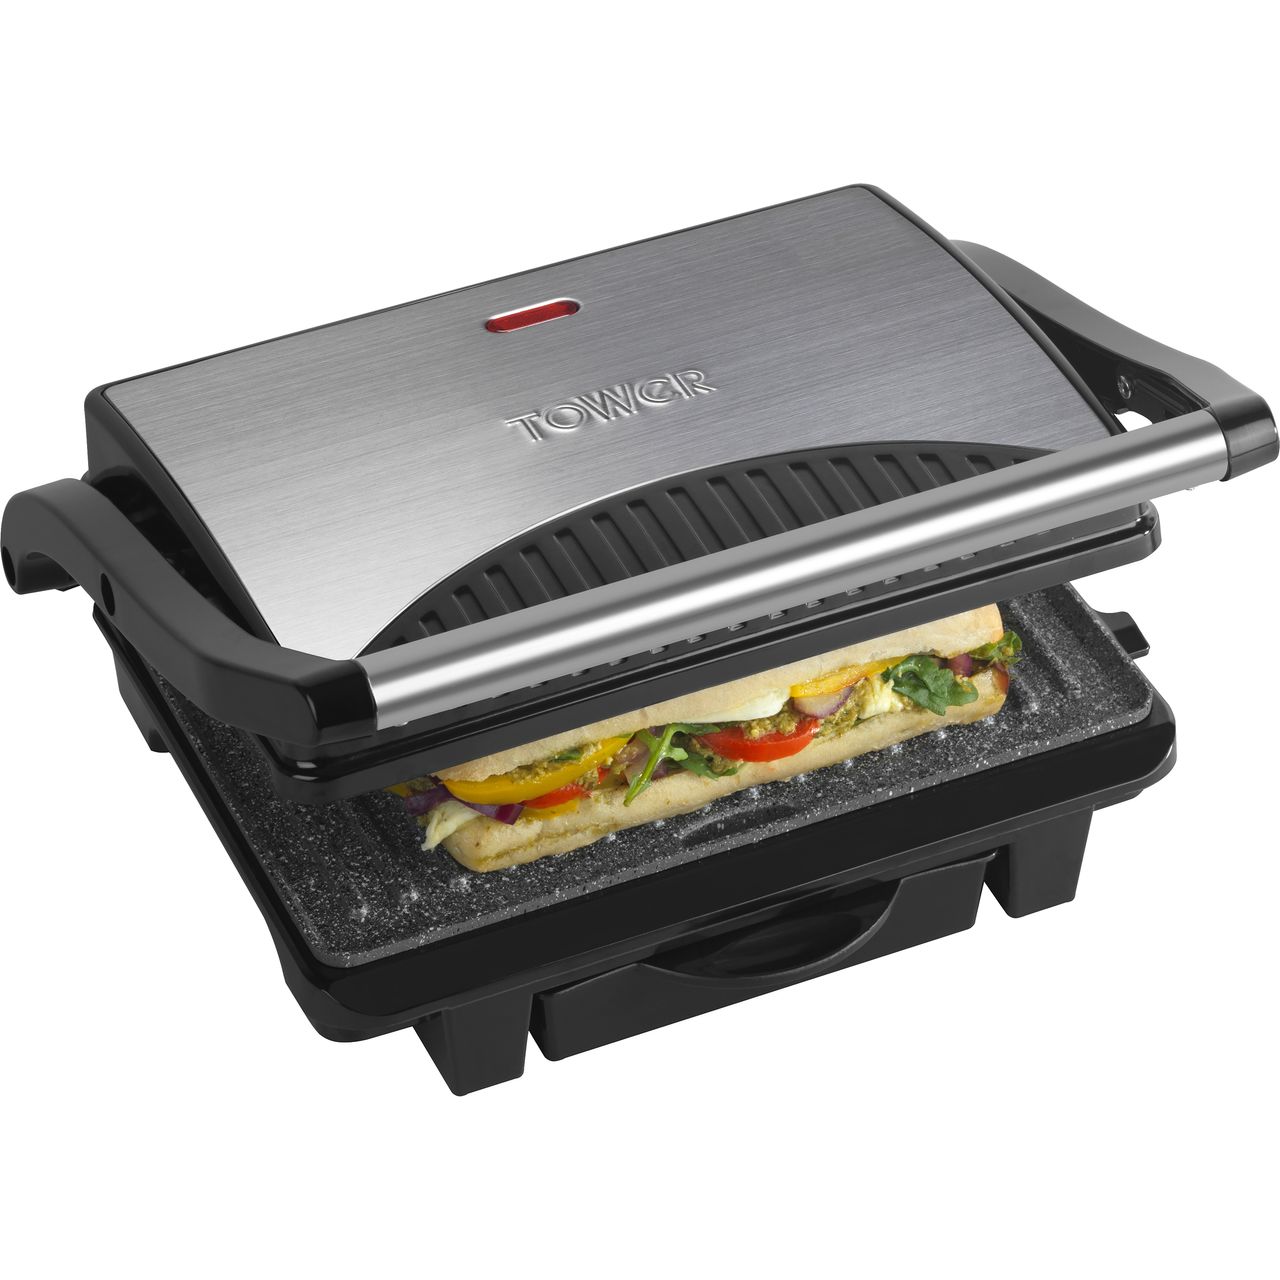 Tower Ceramic Health Grill & Griddle T27009 4 Portions Review